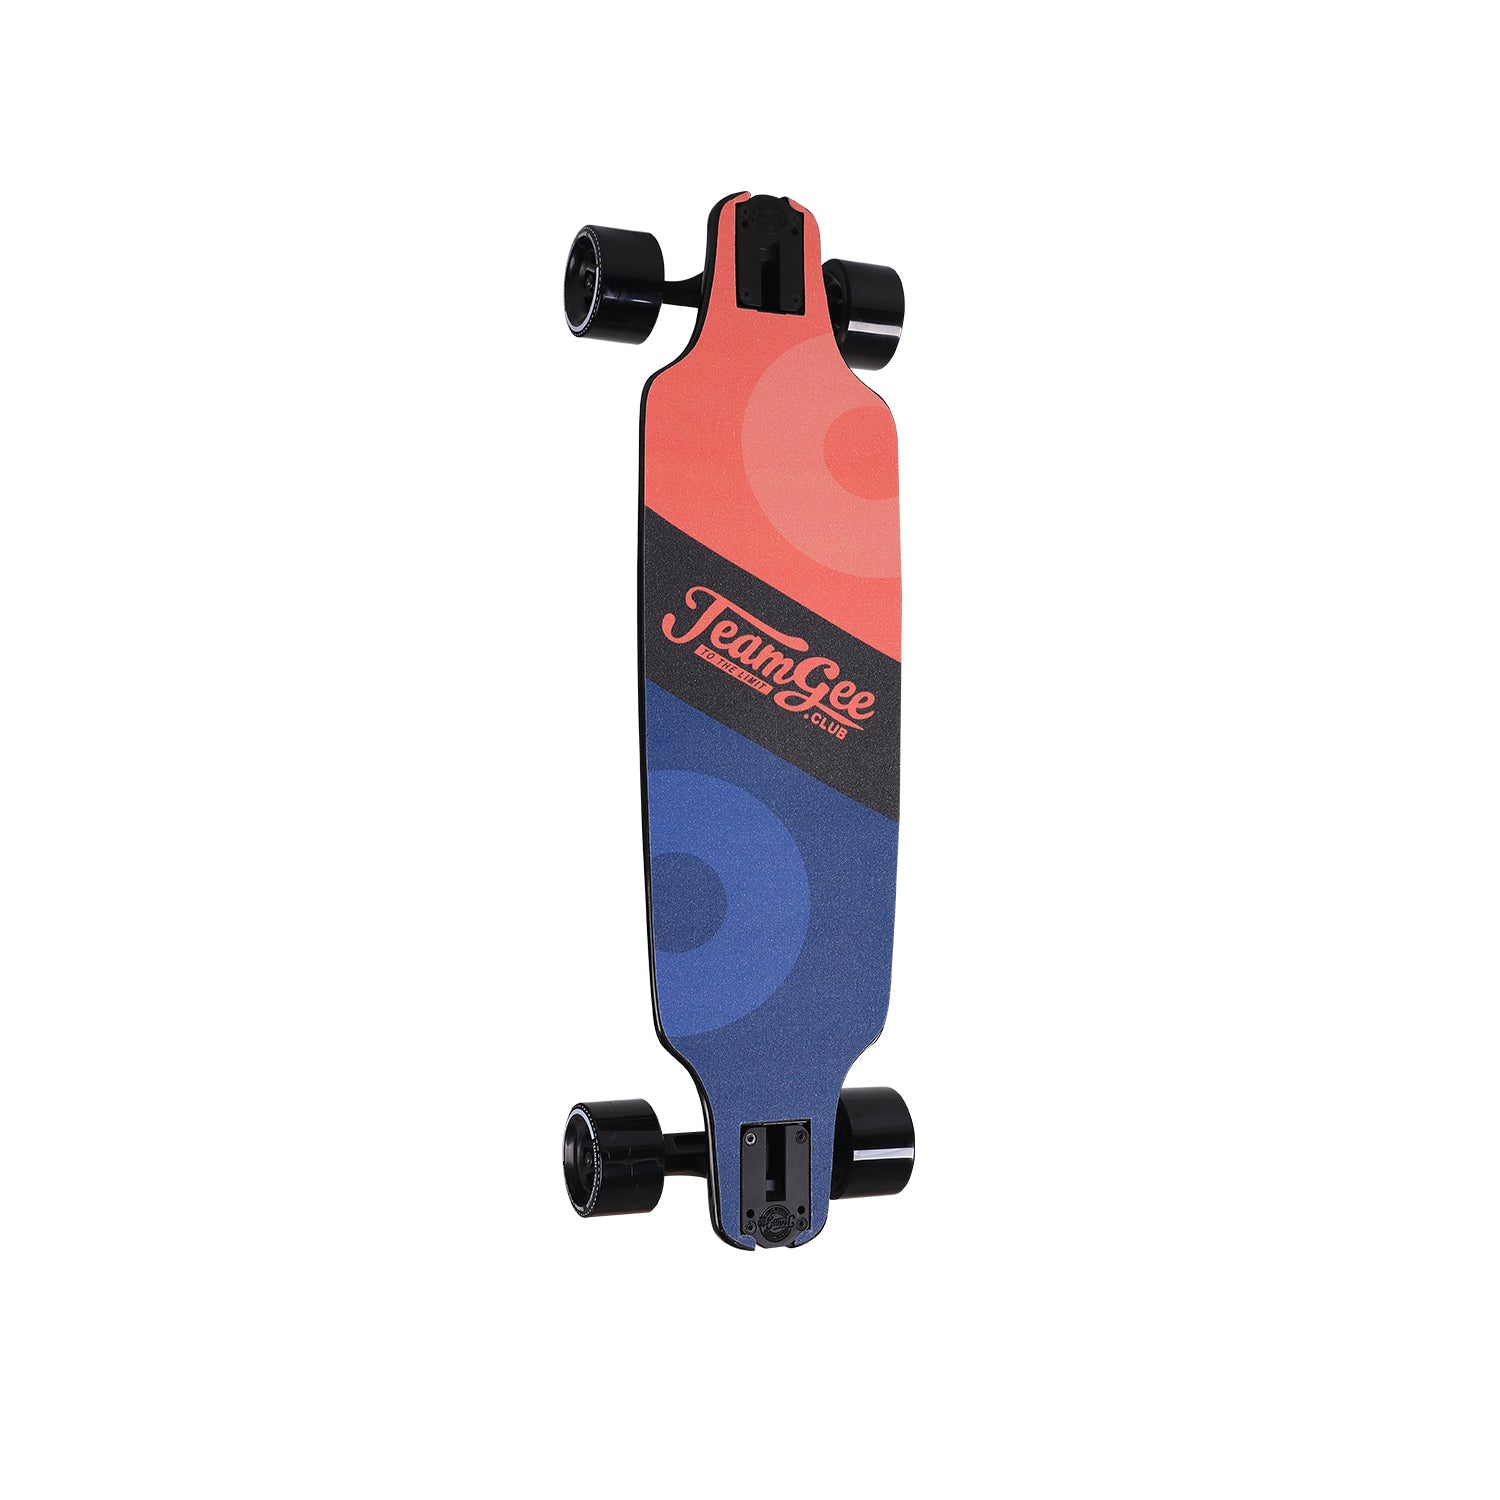 Teamgee H8 31" Electric Skateboard 10 Layers Maple Longboard with Wireless Remote Control & Where Power Meets Agility